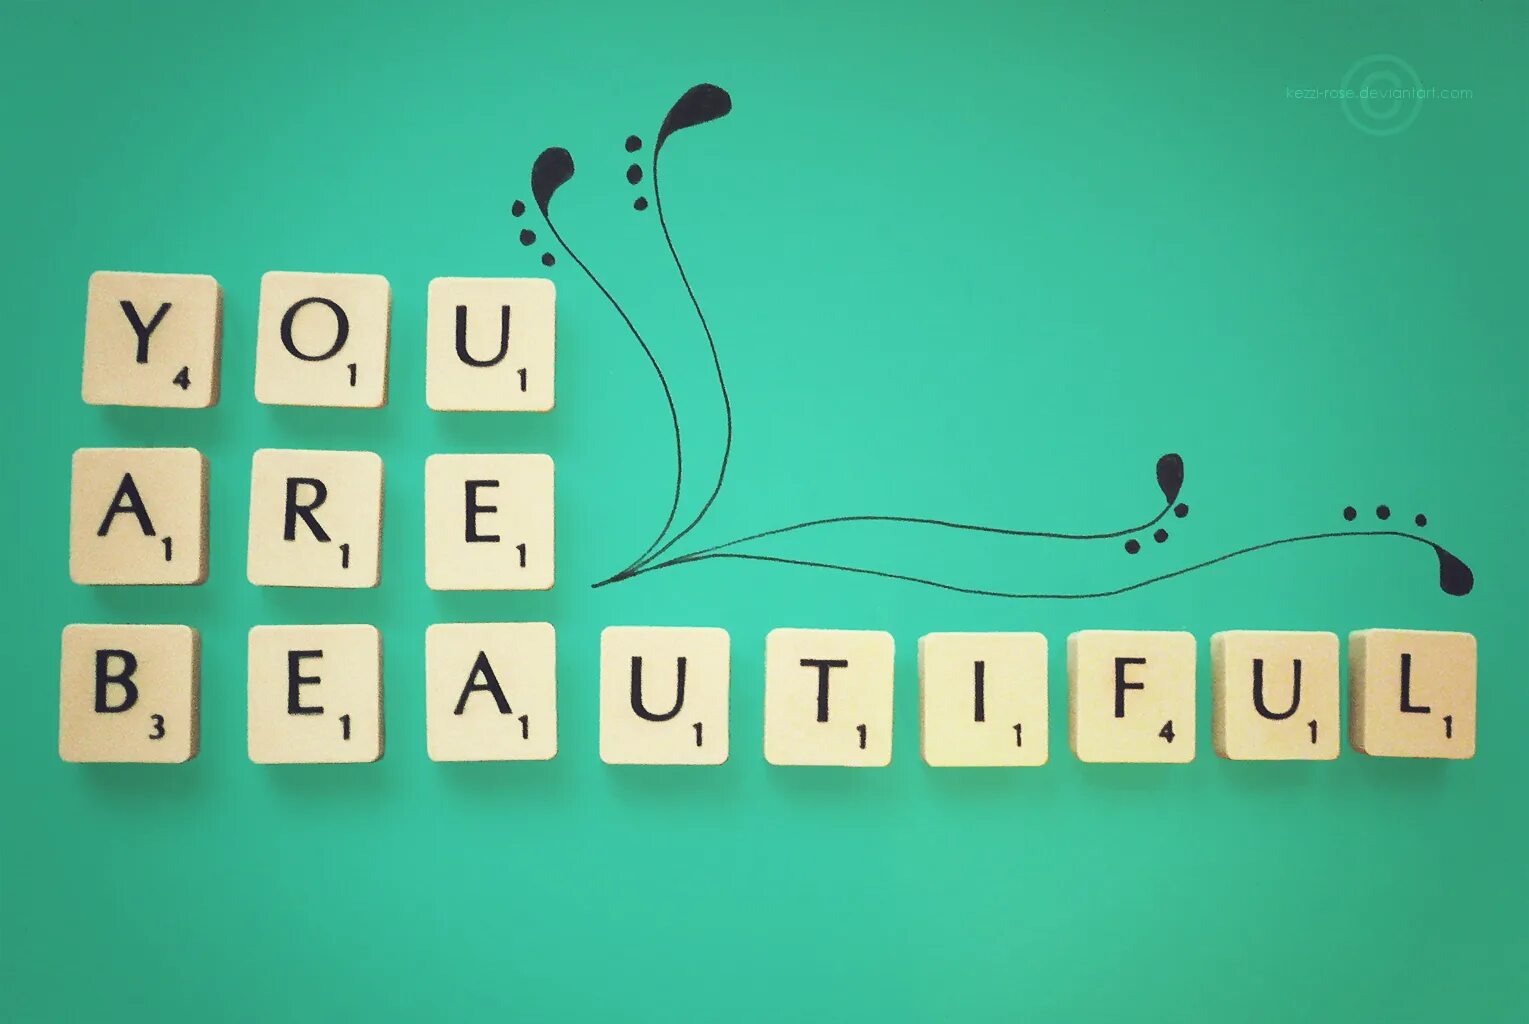 You are. You are picture. You are beautiful. You are q. You are likely t